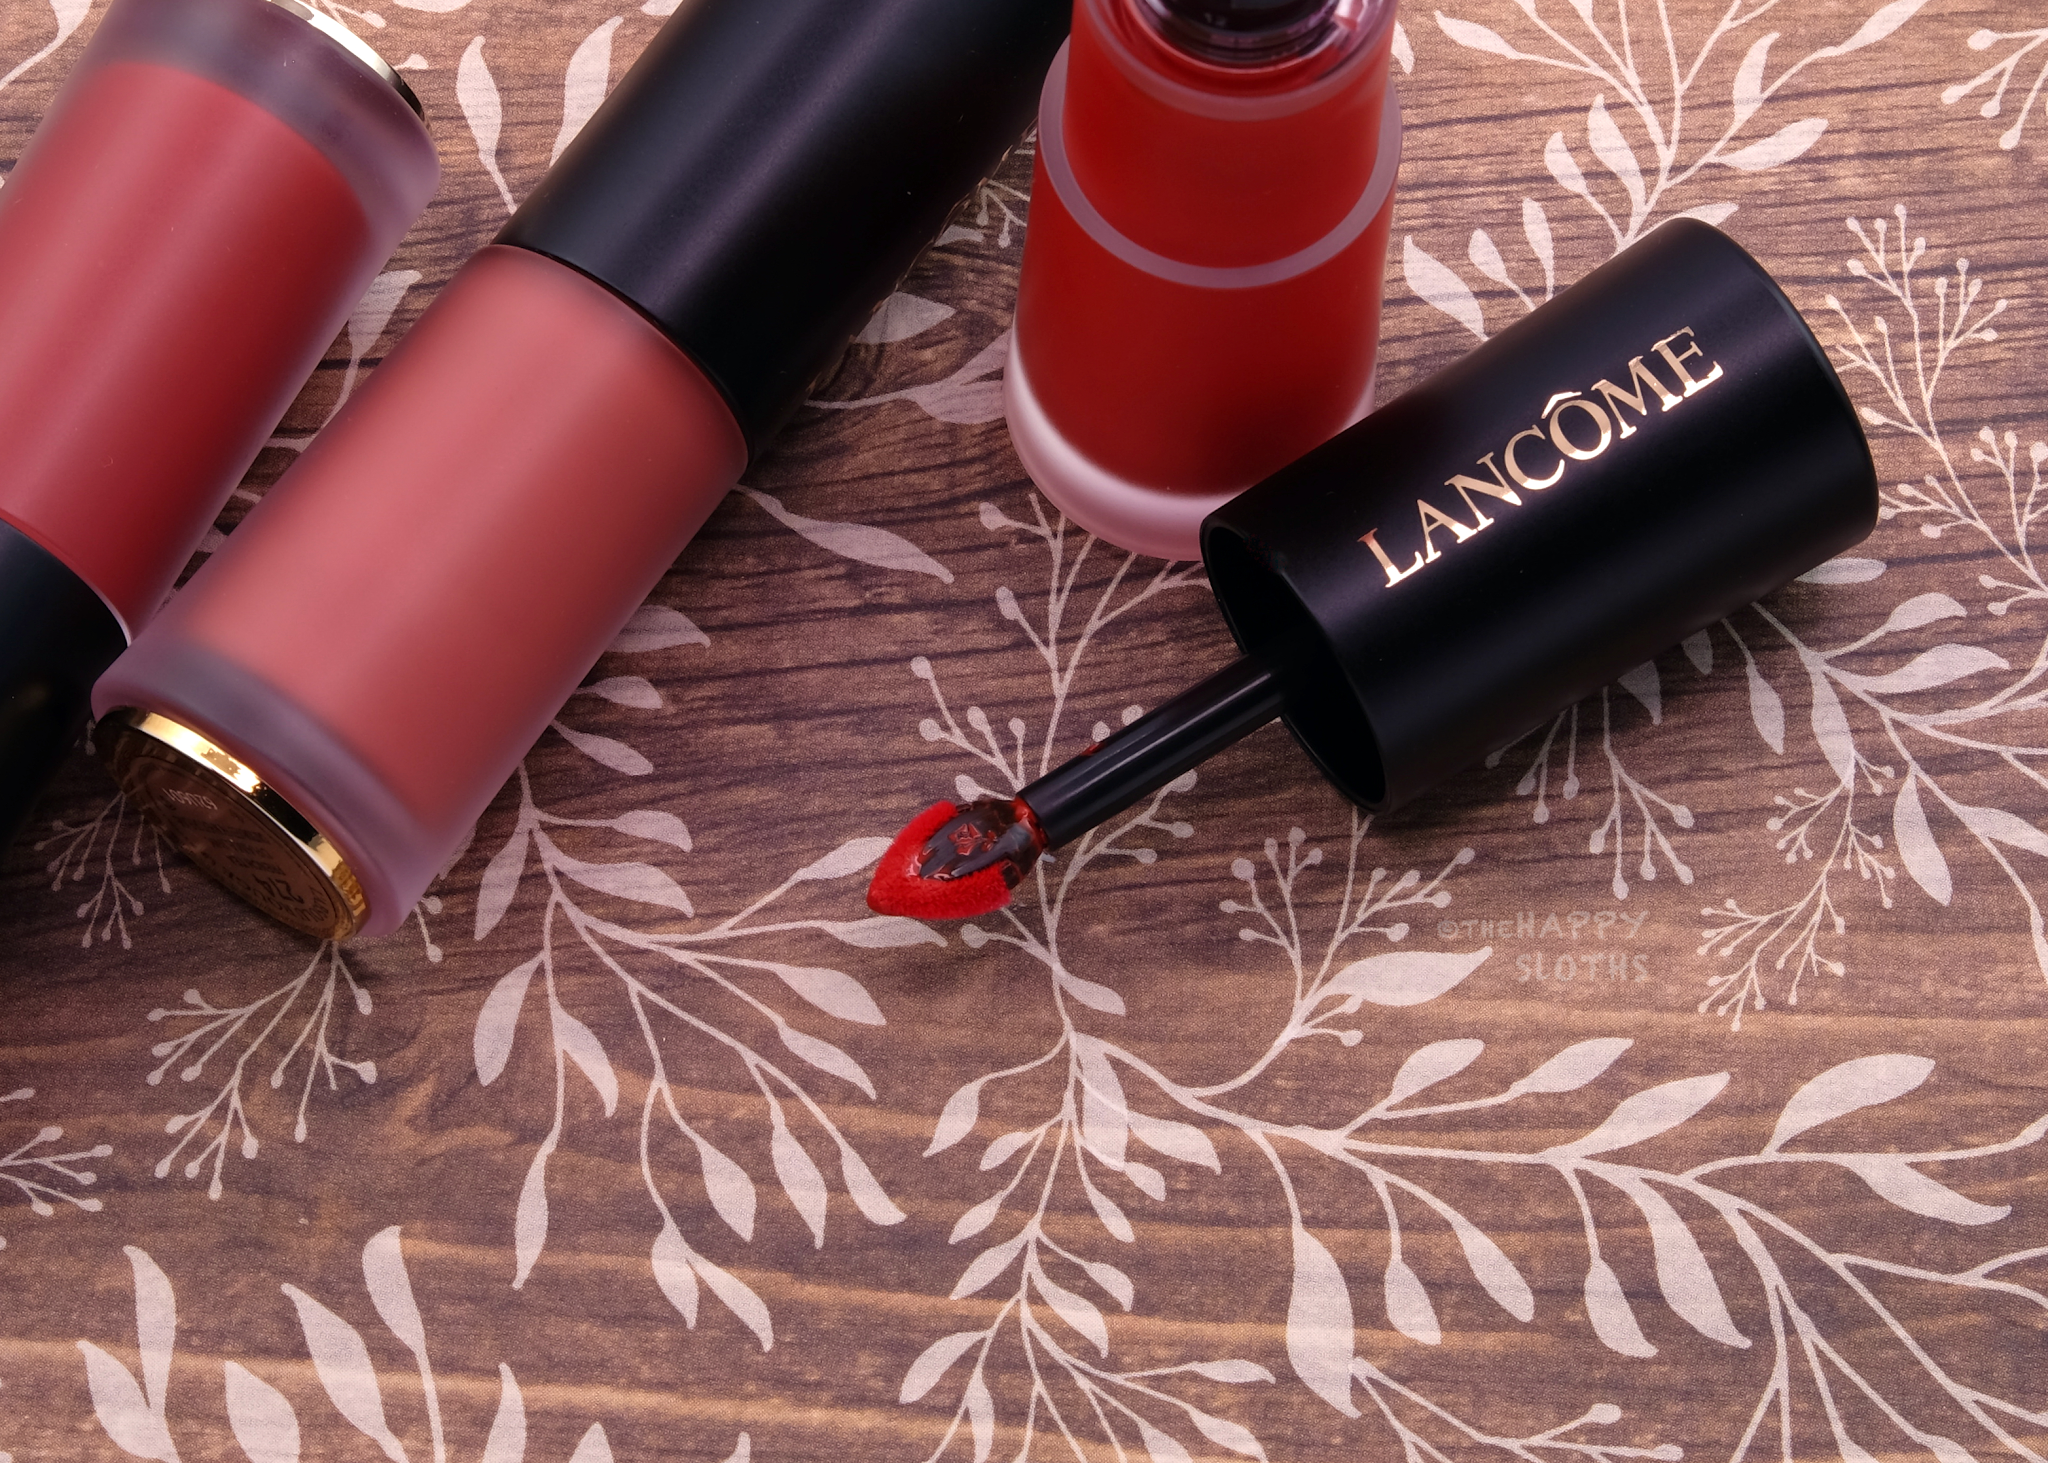 Lancôme | L'Absolu Rouge Drama Ink: Review and Swatches